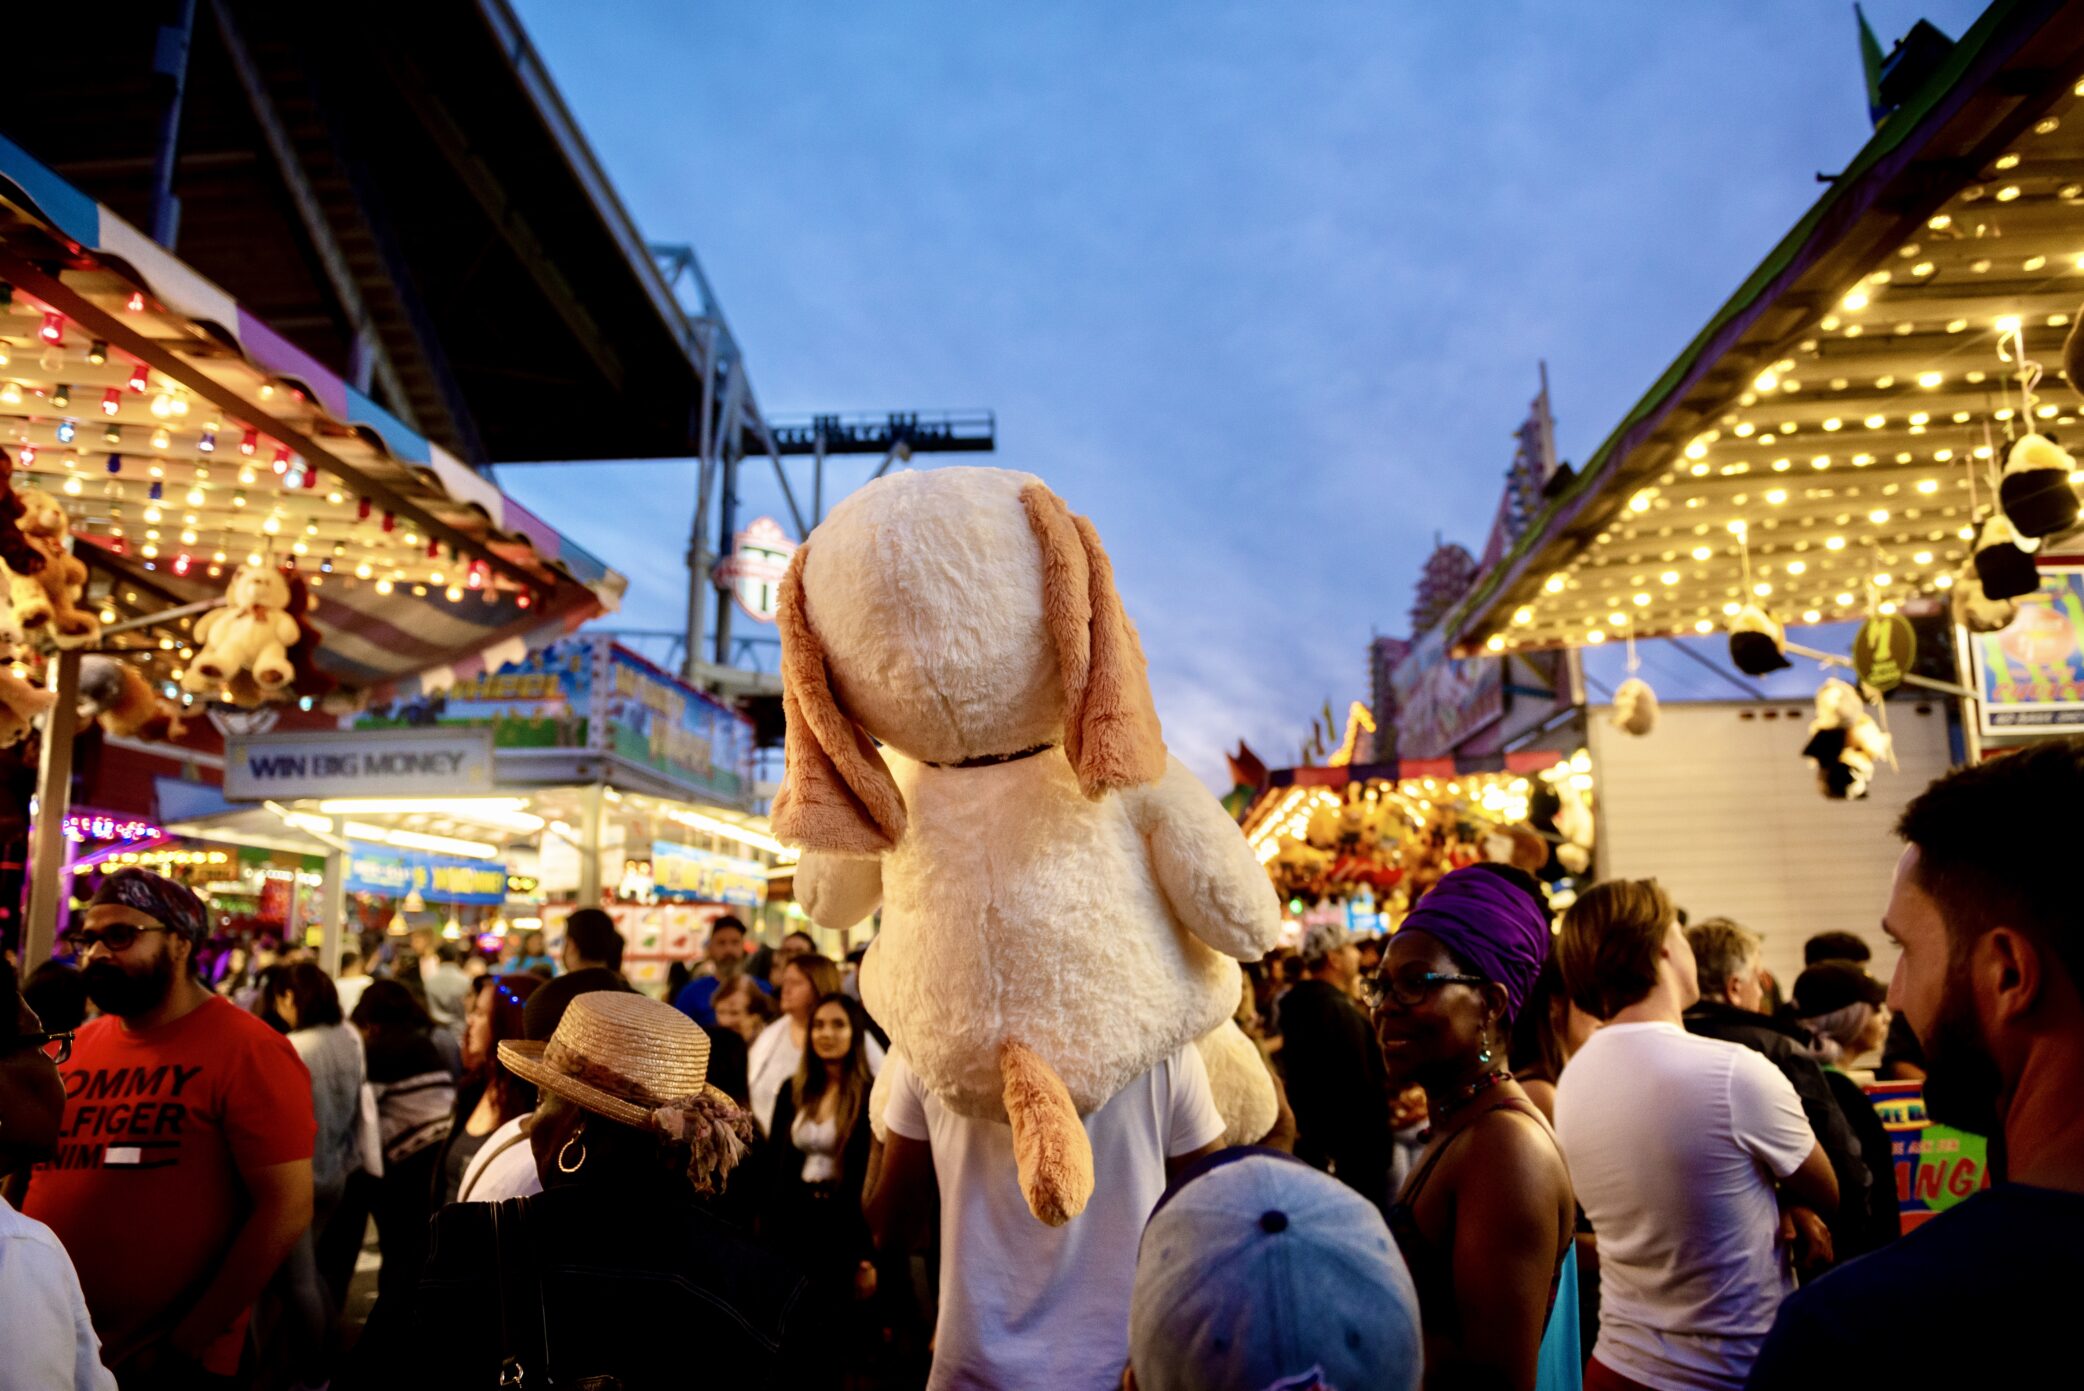 Image of a crowded CNE Midway at dusk. Guest holding a large stuffed prize on their shoulders walking through the crowd.